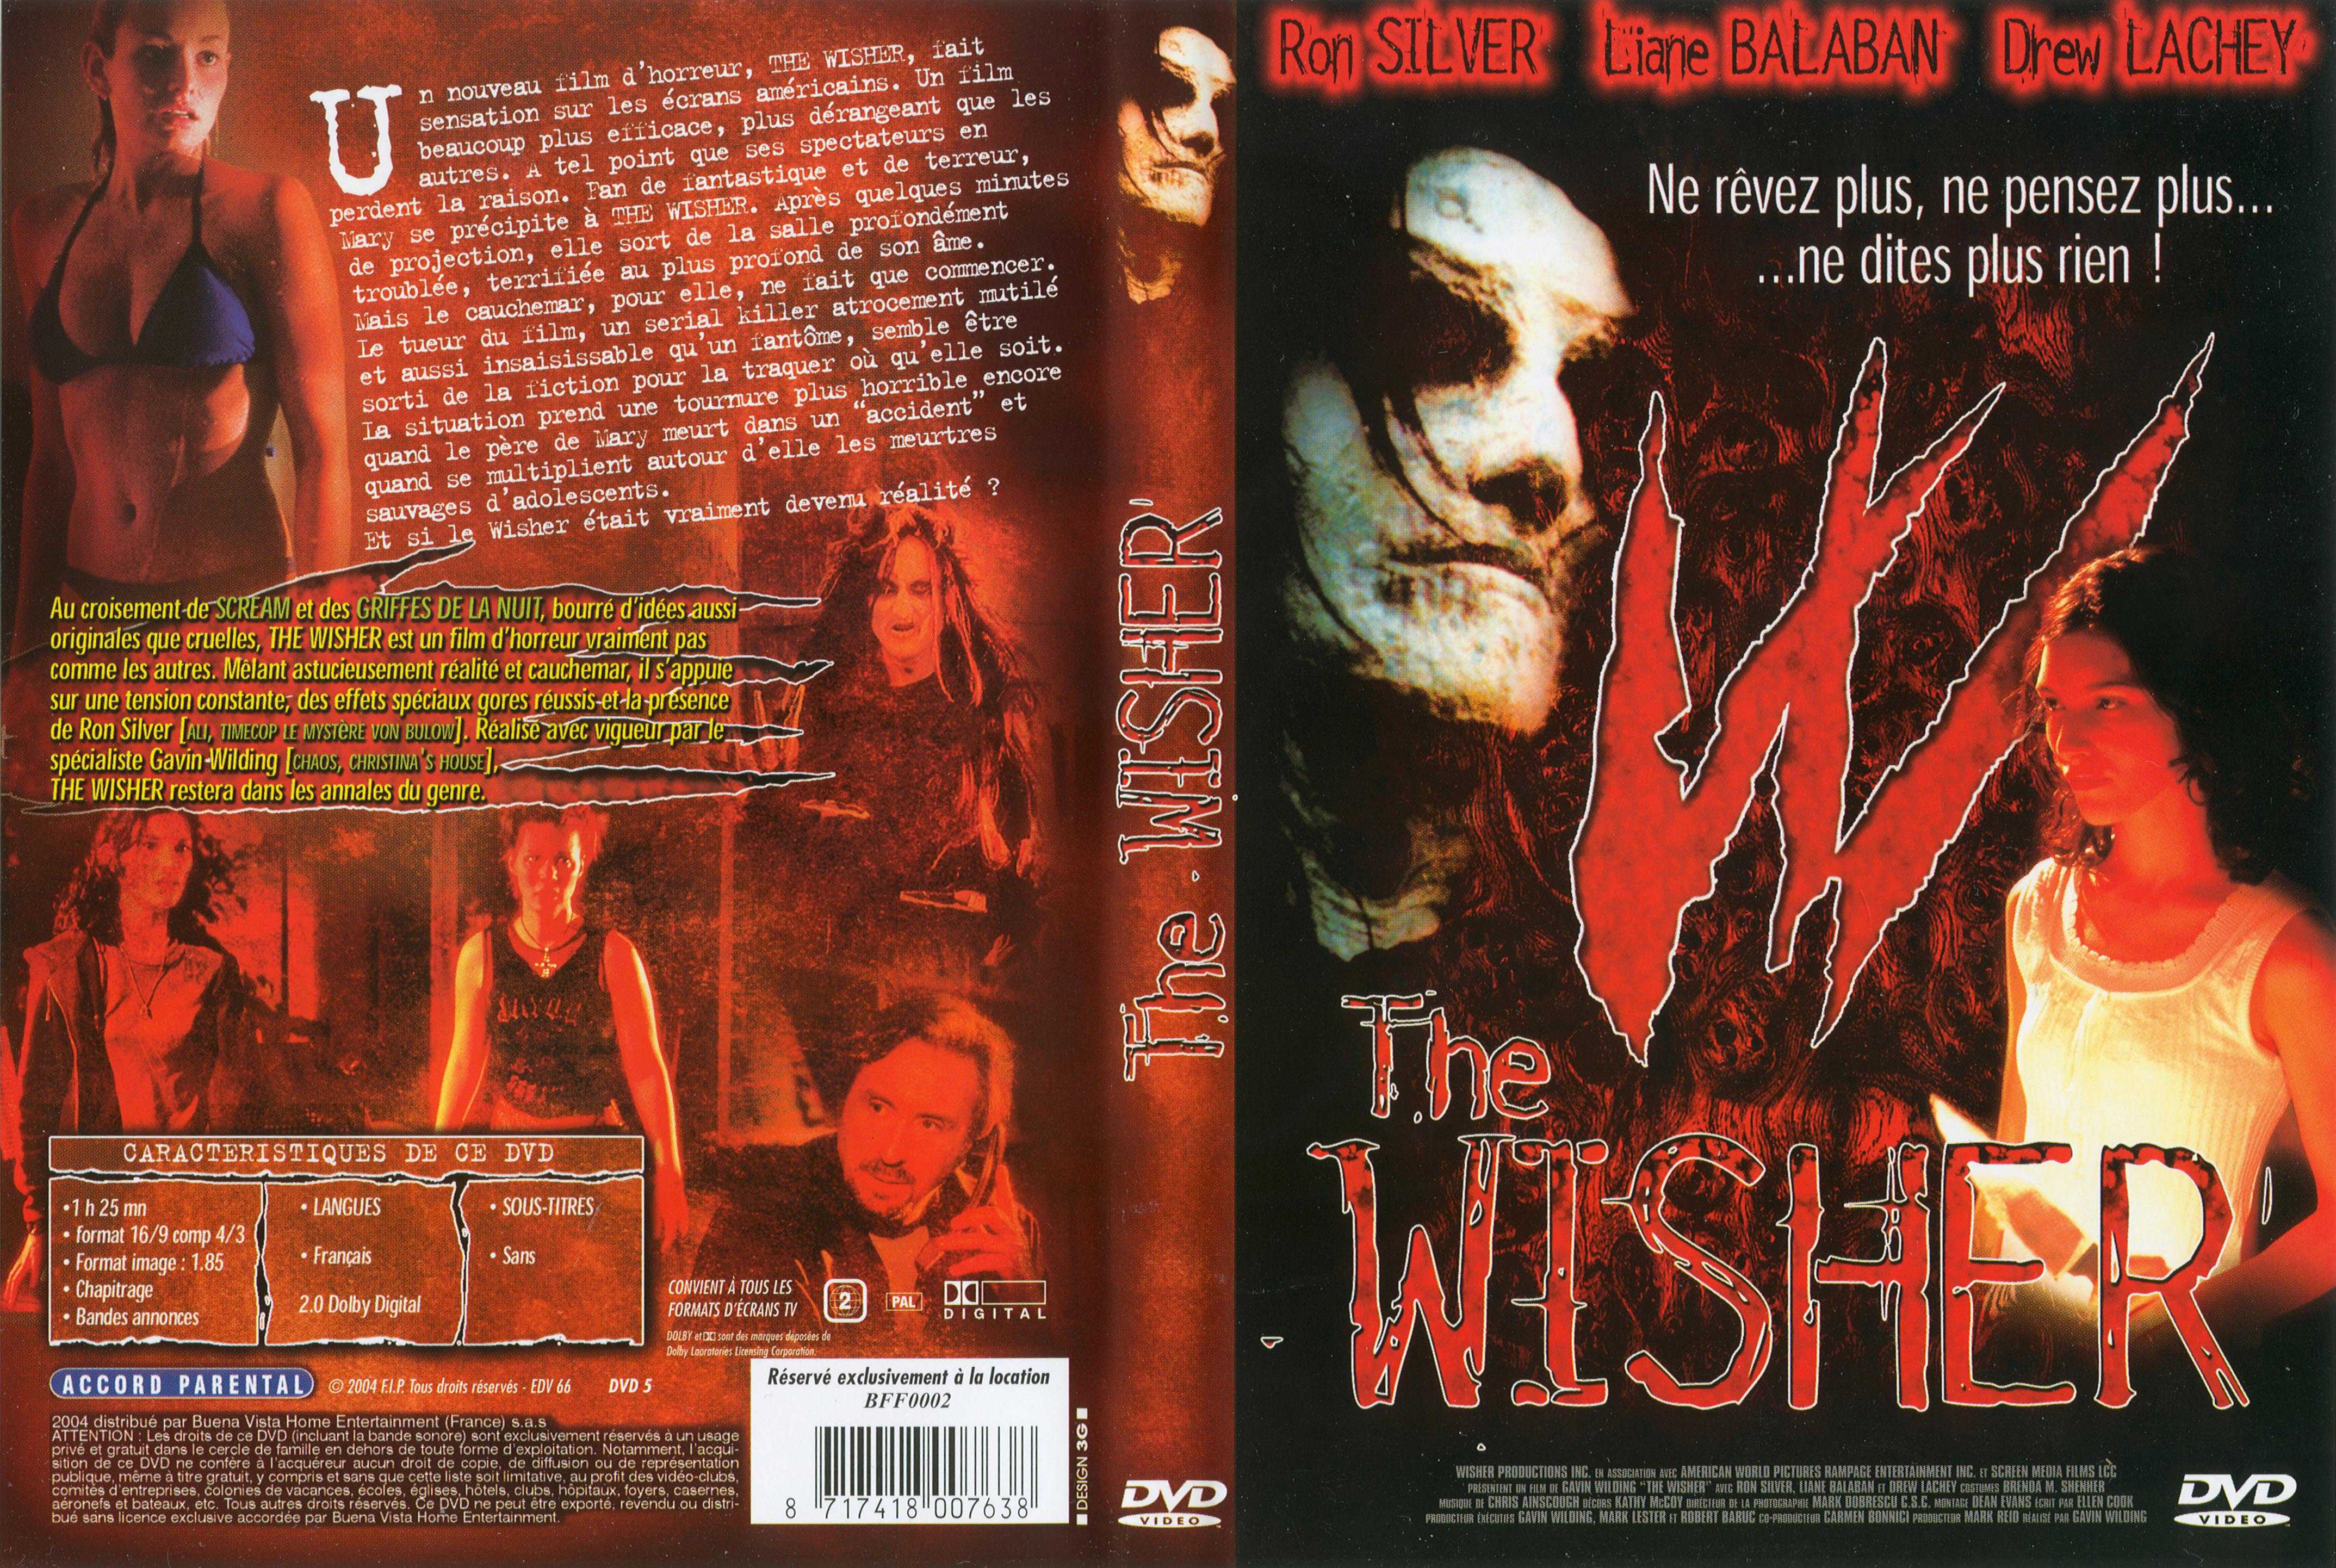 Jaquette DVD The wisher